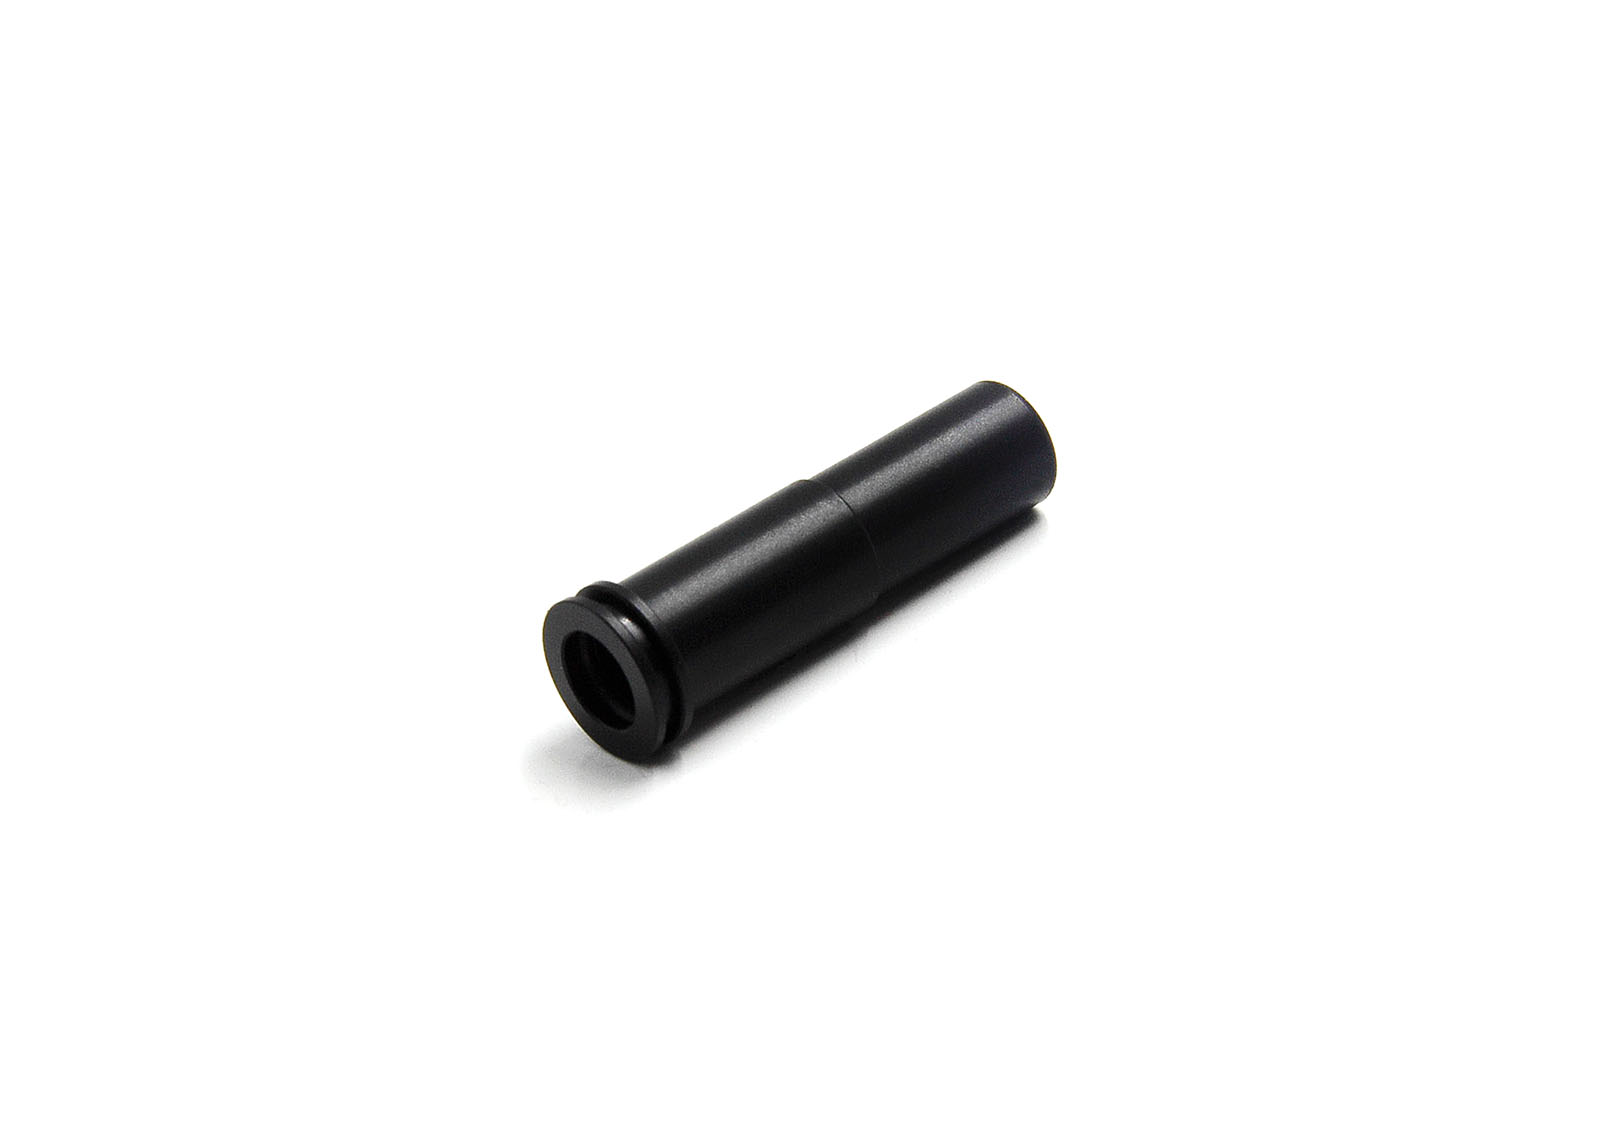 Air Seal Nozzle for Classic Army|ECHO1 SCAR Series - Modify Airsoft parts